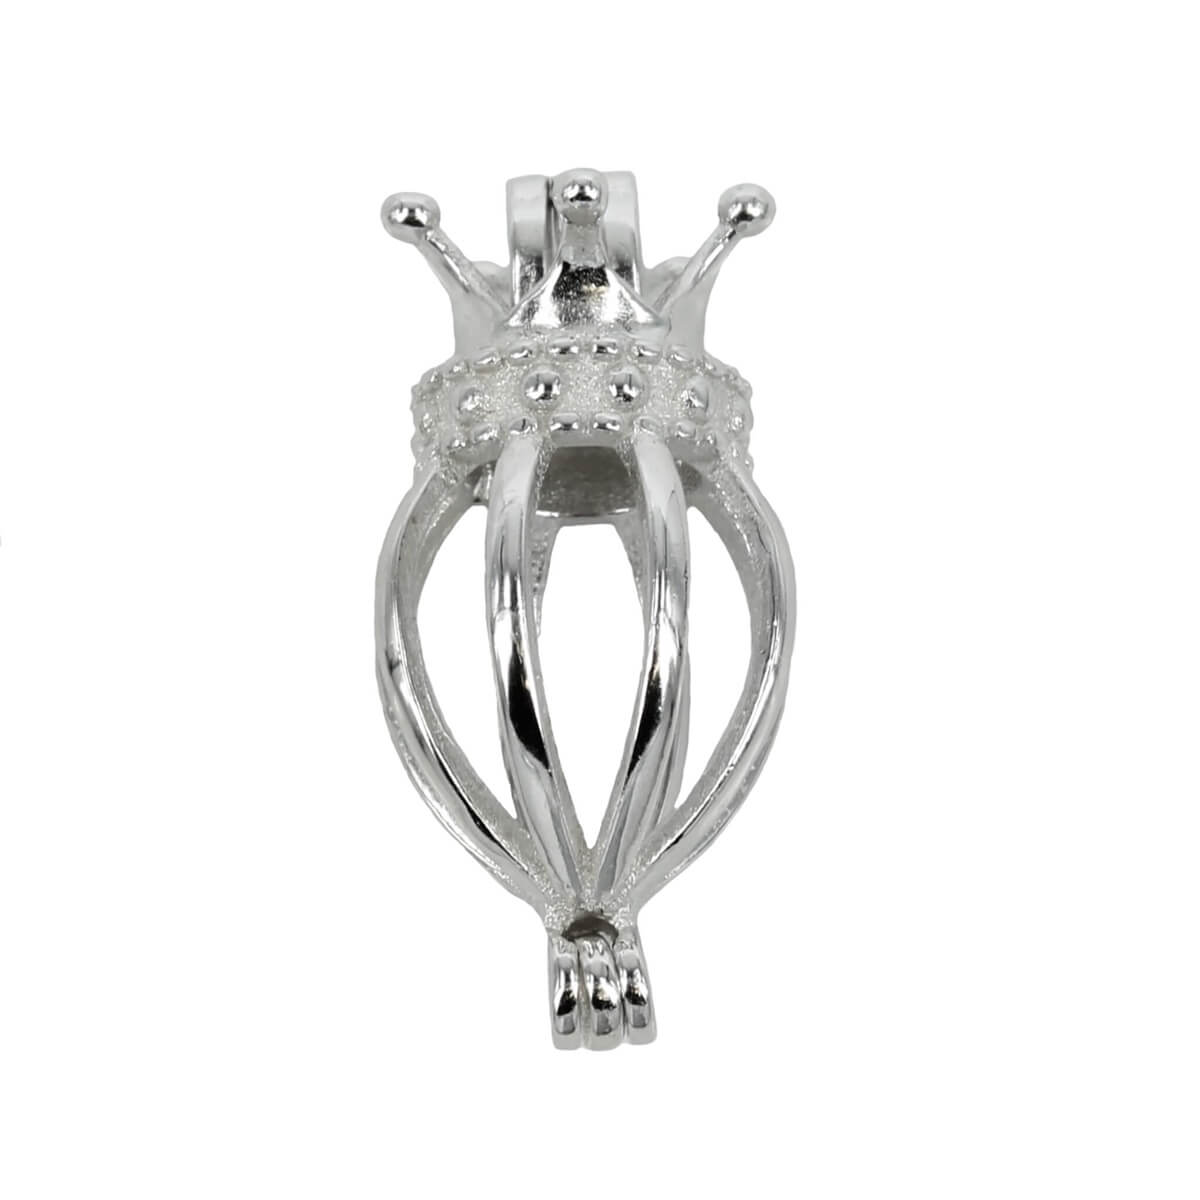 Crowned Pear Shaped Cage Pendant with Incorporated Bail in Sterling Silver 8mm 